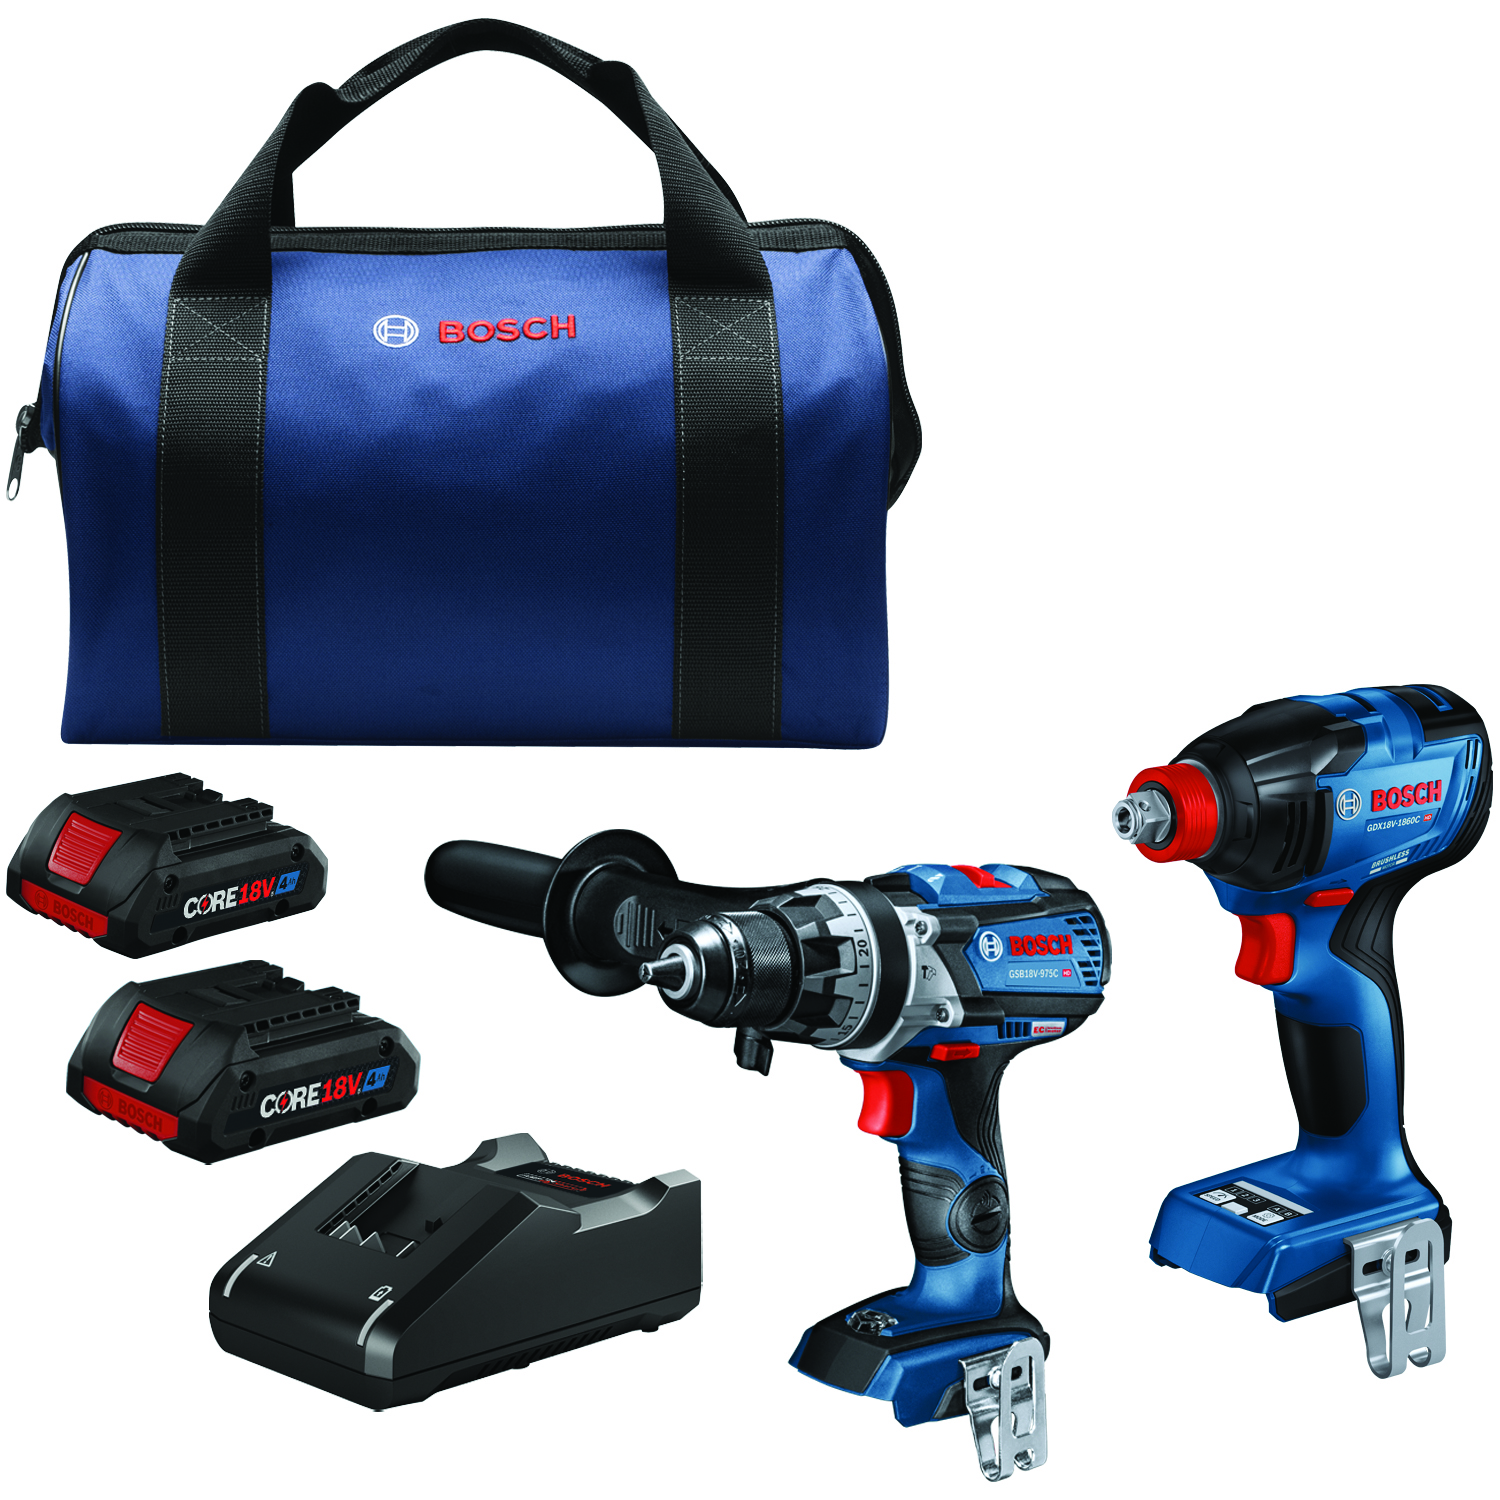 Bosch CLPK232-181 18V 2-Tool Combo Kit (Drill/Driver & Impact Driver) with  (2) 2.0 Ah Batteries - Power Tool Combo Packs 